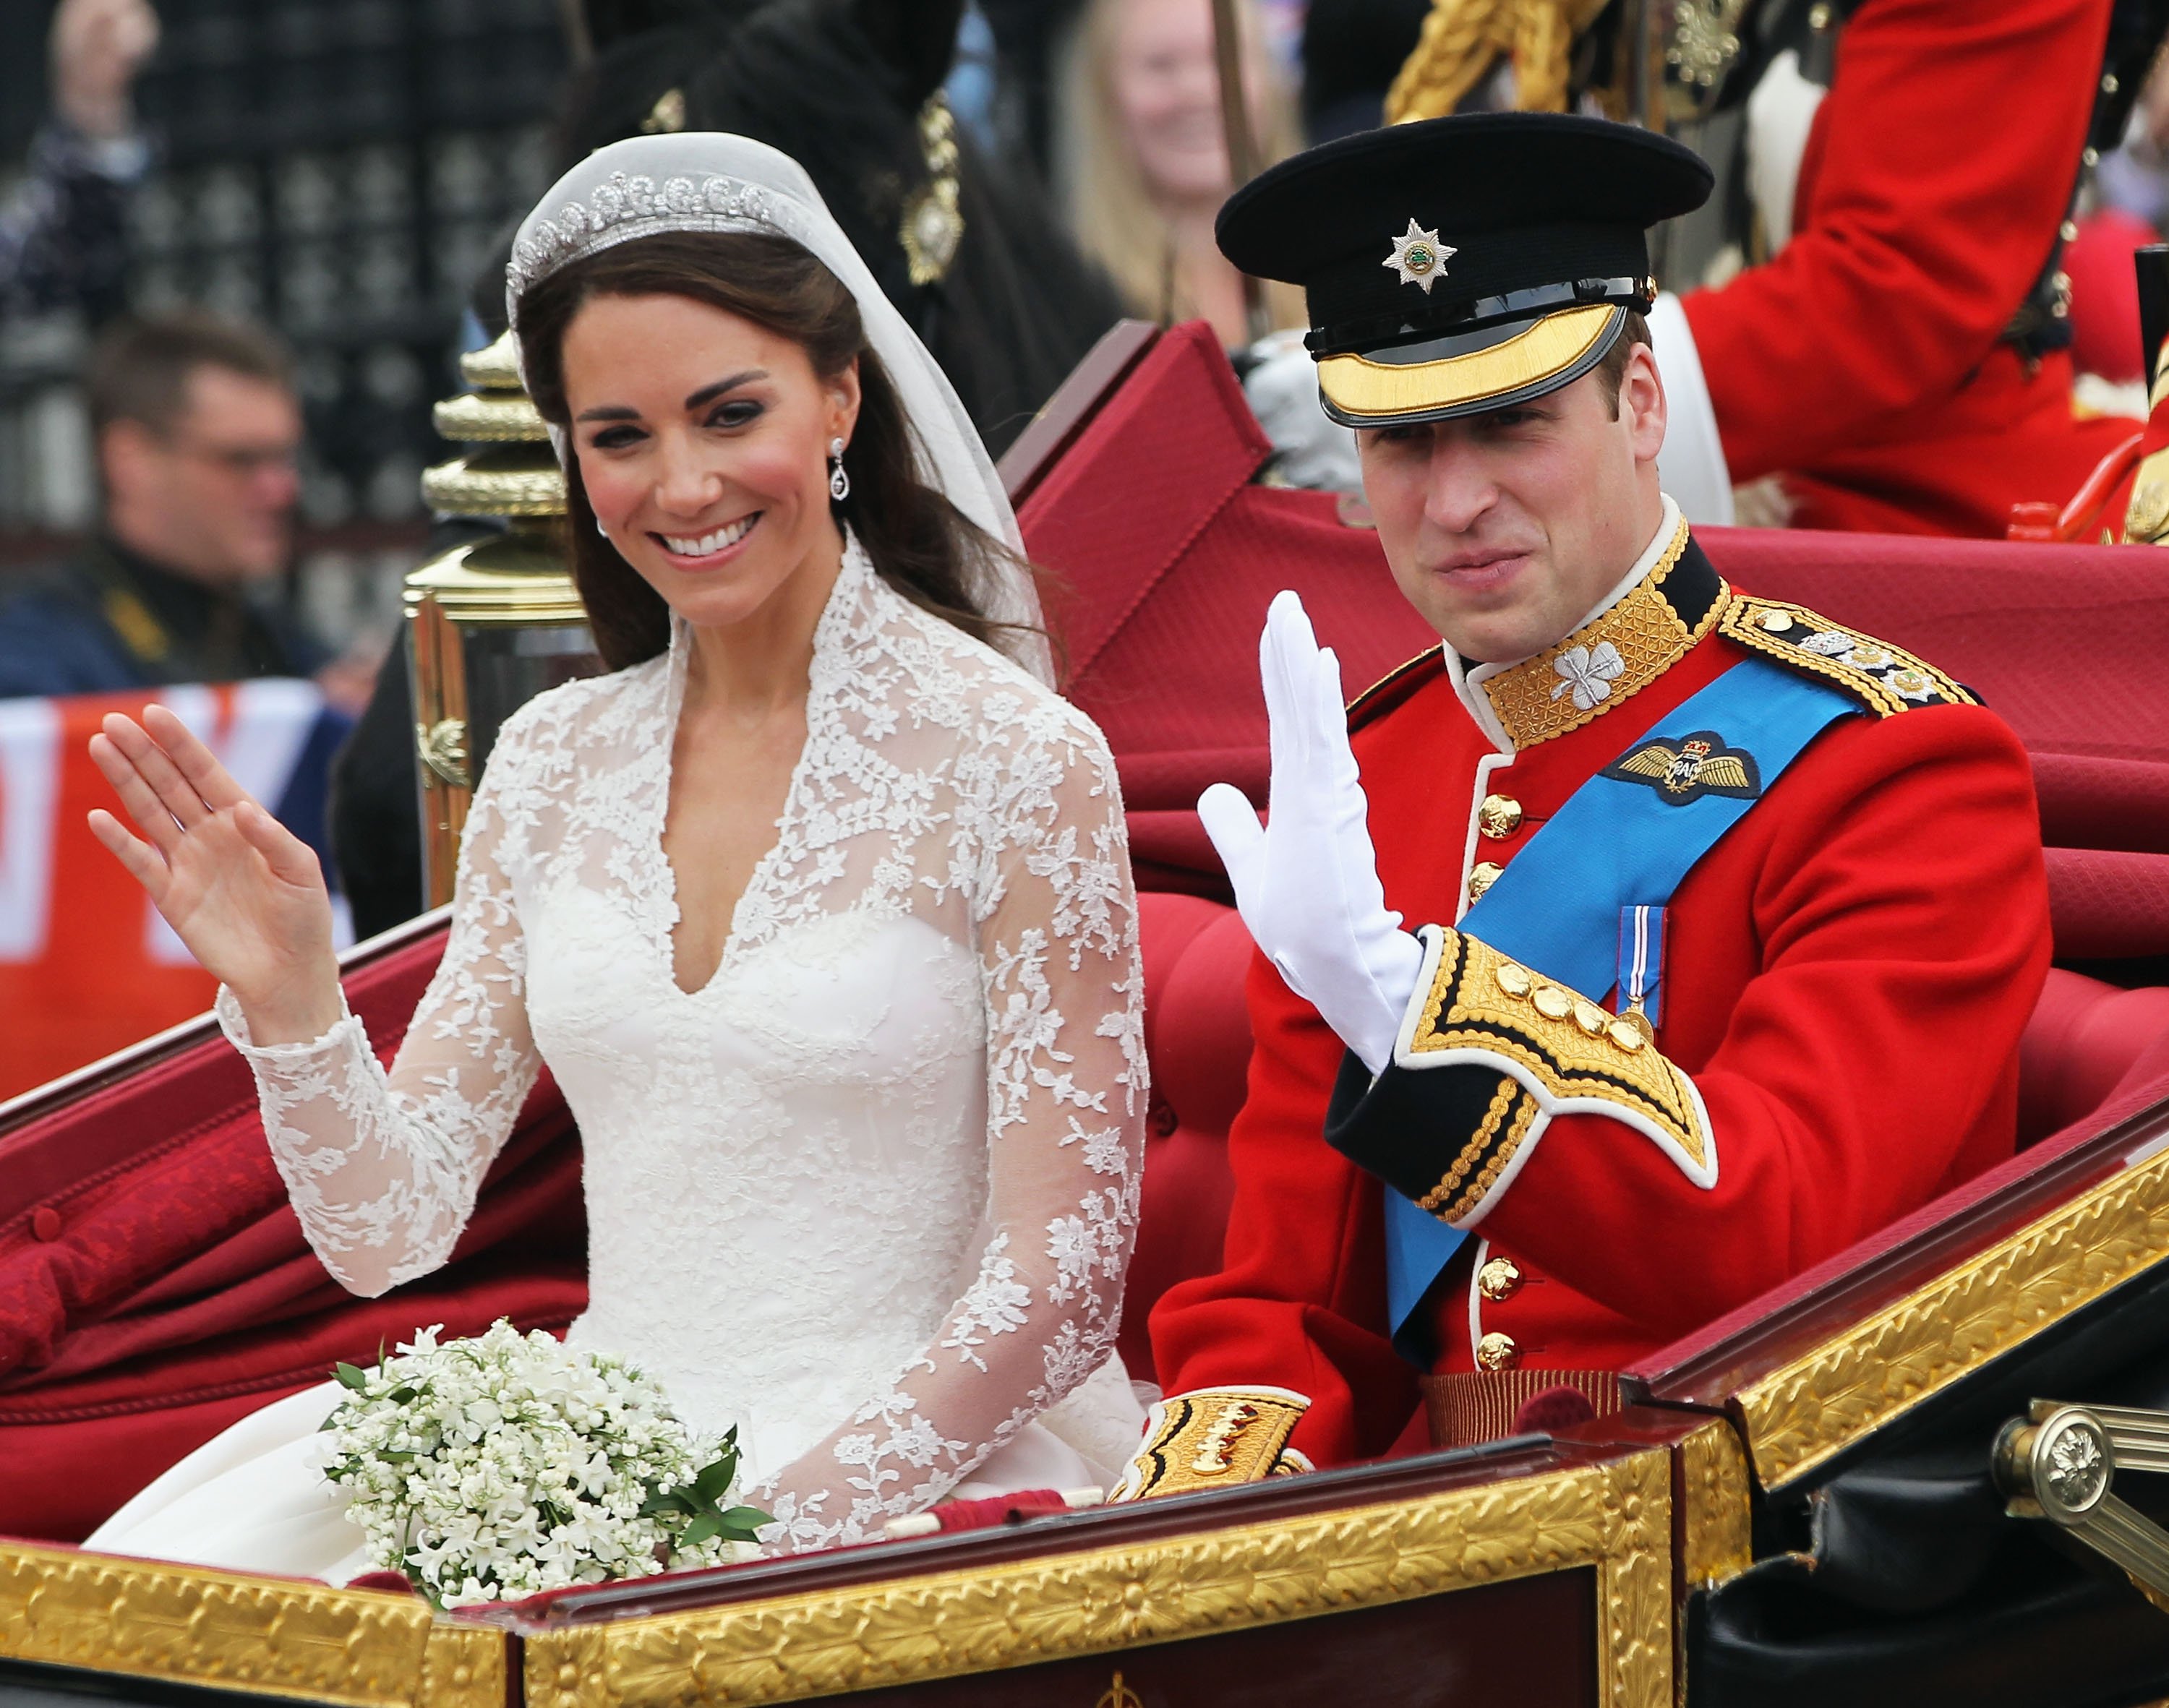 Prince William and Duchess Kate after their marriage on April 29, 2011 in London, England | Source: Getty Images